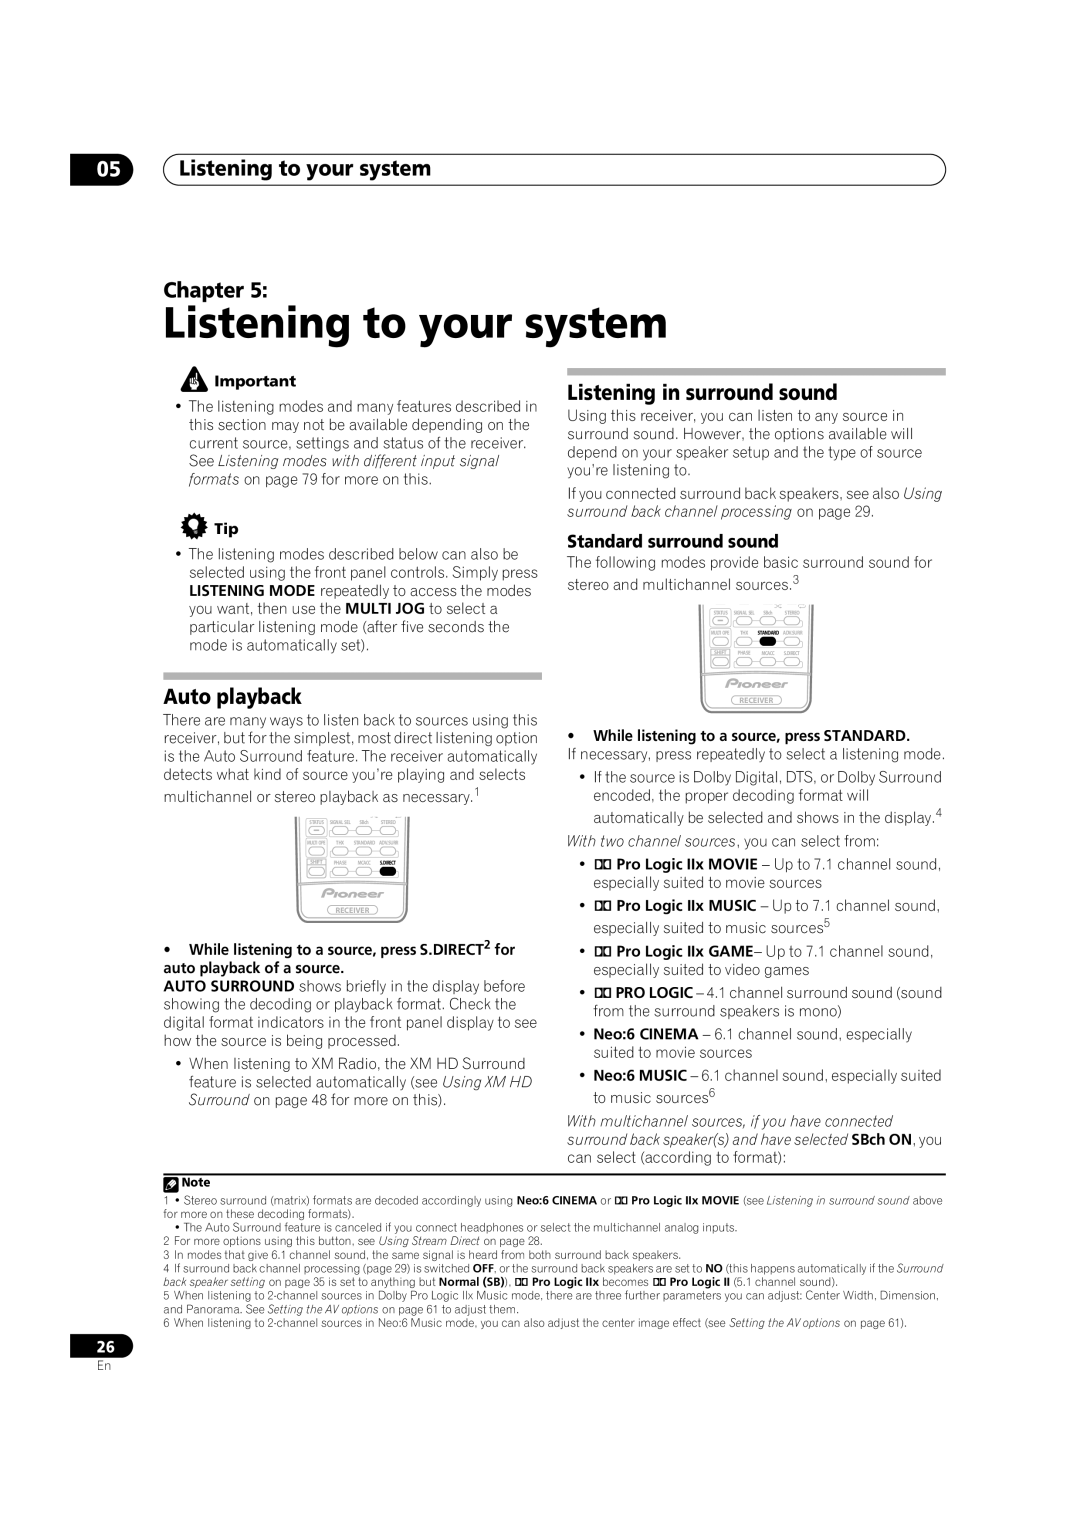 Classe Audio VSX-81TXV-S manual 05Listening to your system Chapter, Auto playback, Listening in surround sound 